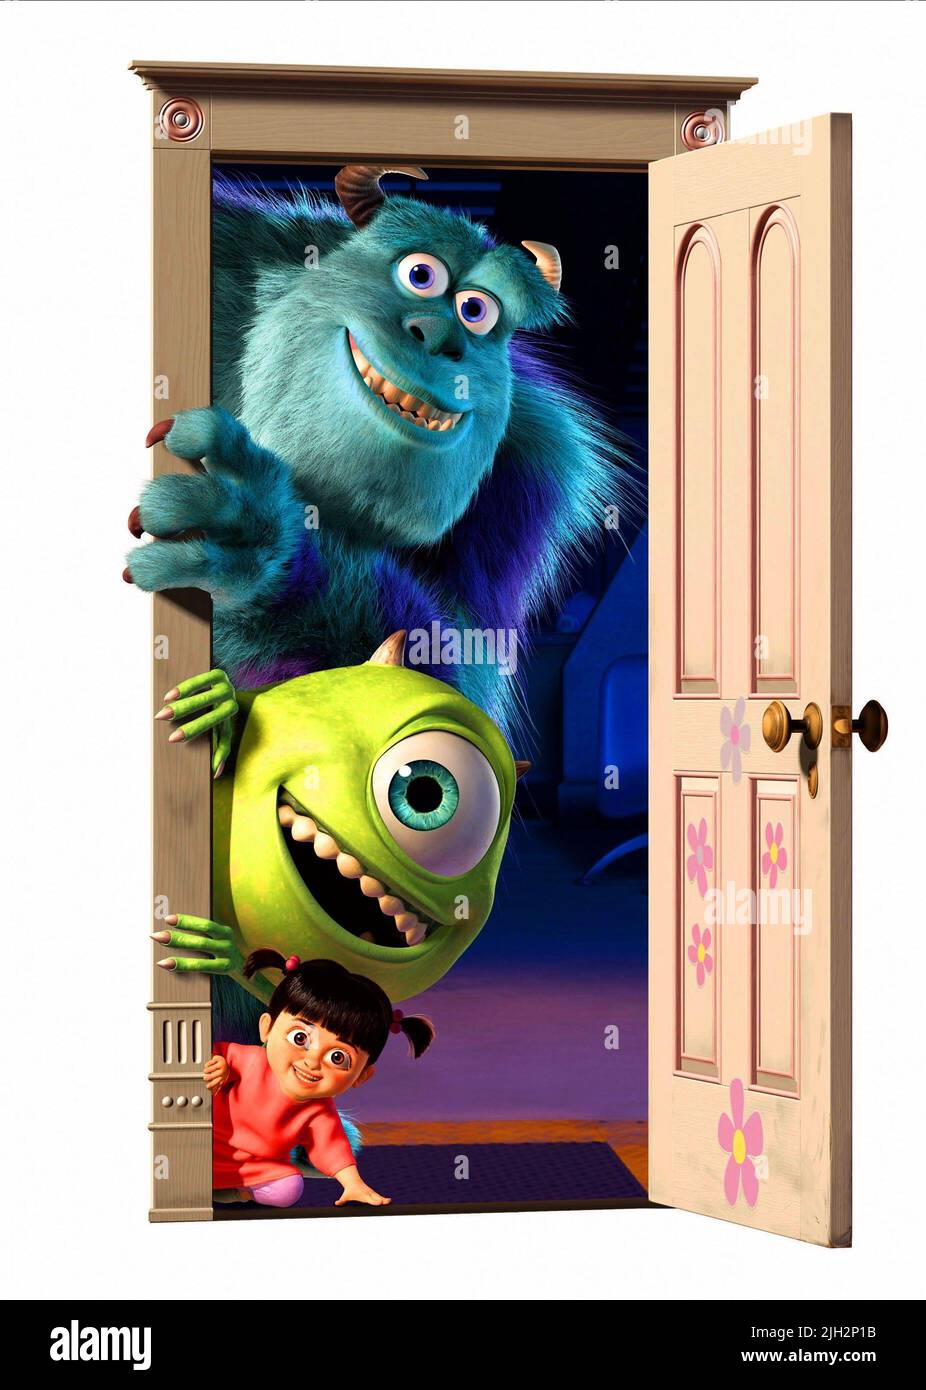  Disney Mike and Boo Monsters, Inc. Character Action